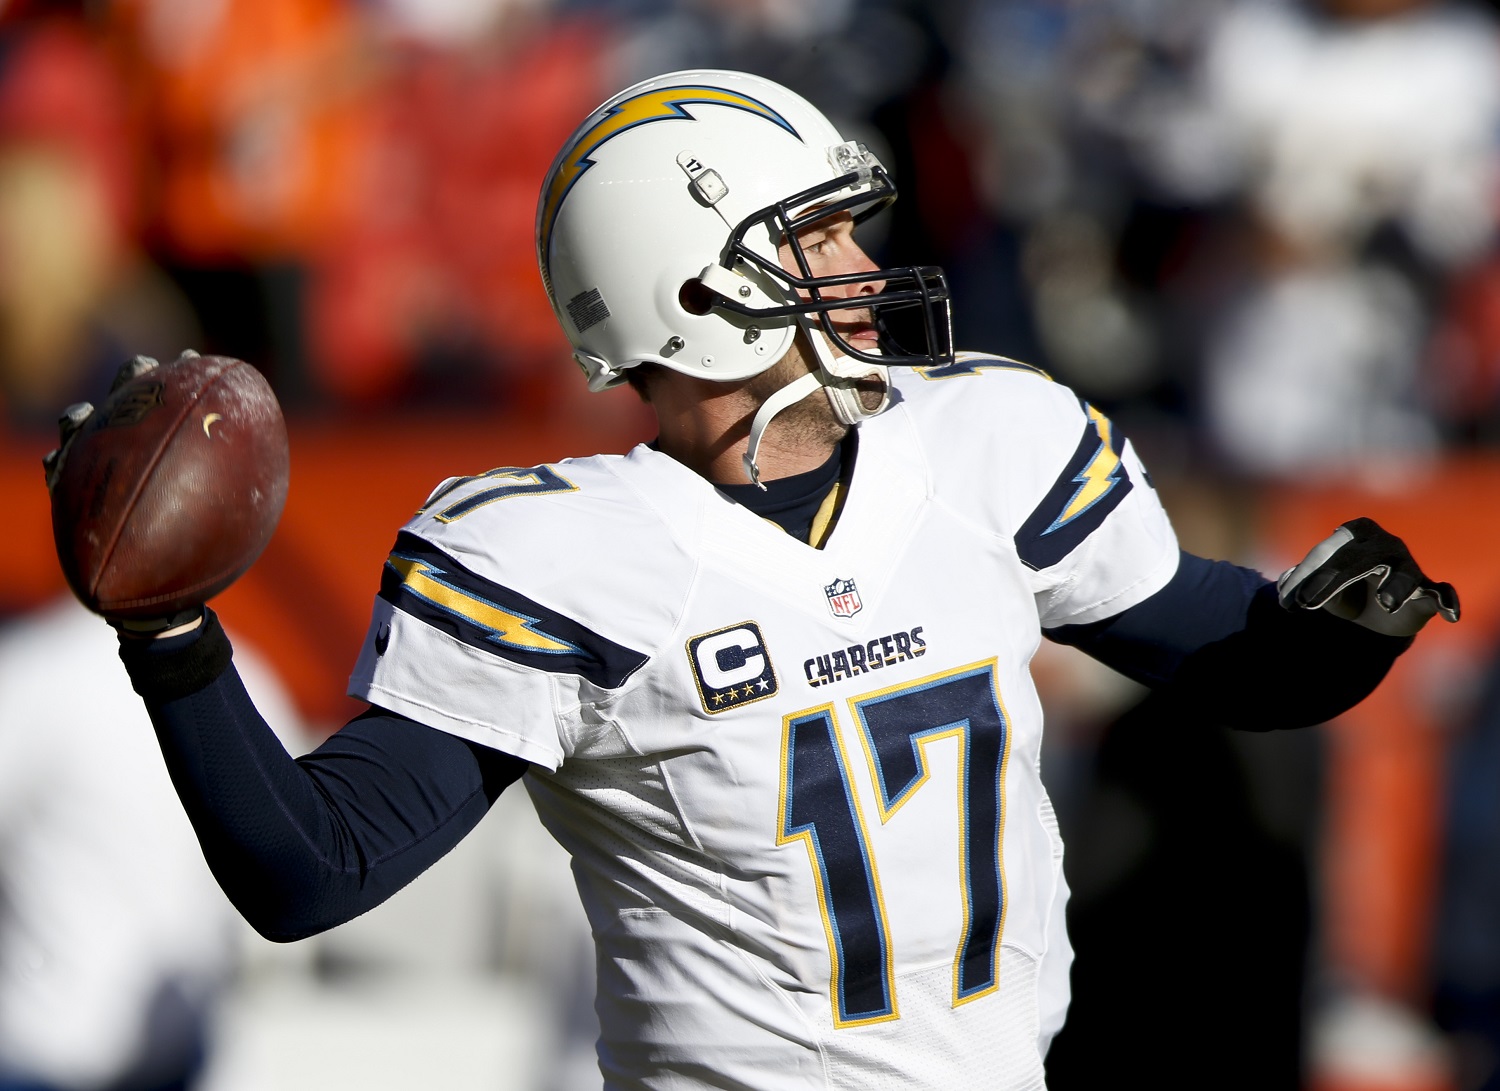 San Diego Chargers quarterback Philip Rivers throws during warm ups during an NFL football game against the Denver Broncos, Sunday, Jan. 3, 2016, in Denver. (AP Photo/David Zalubowski)